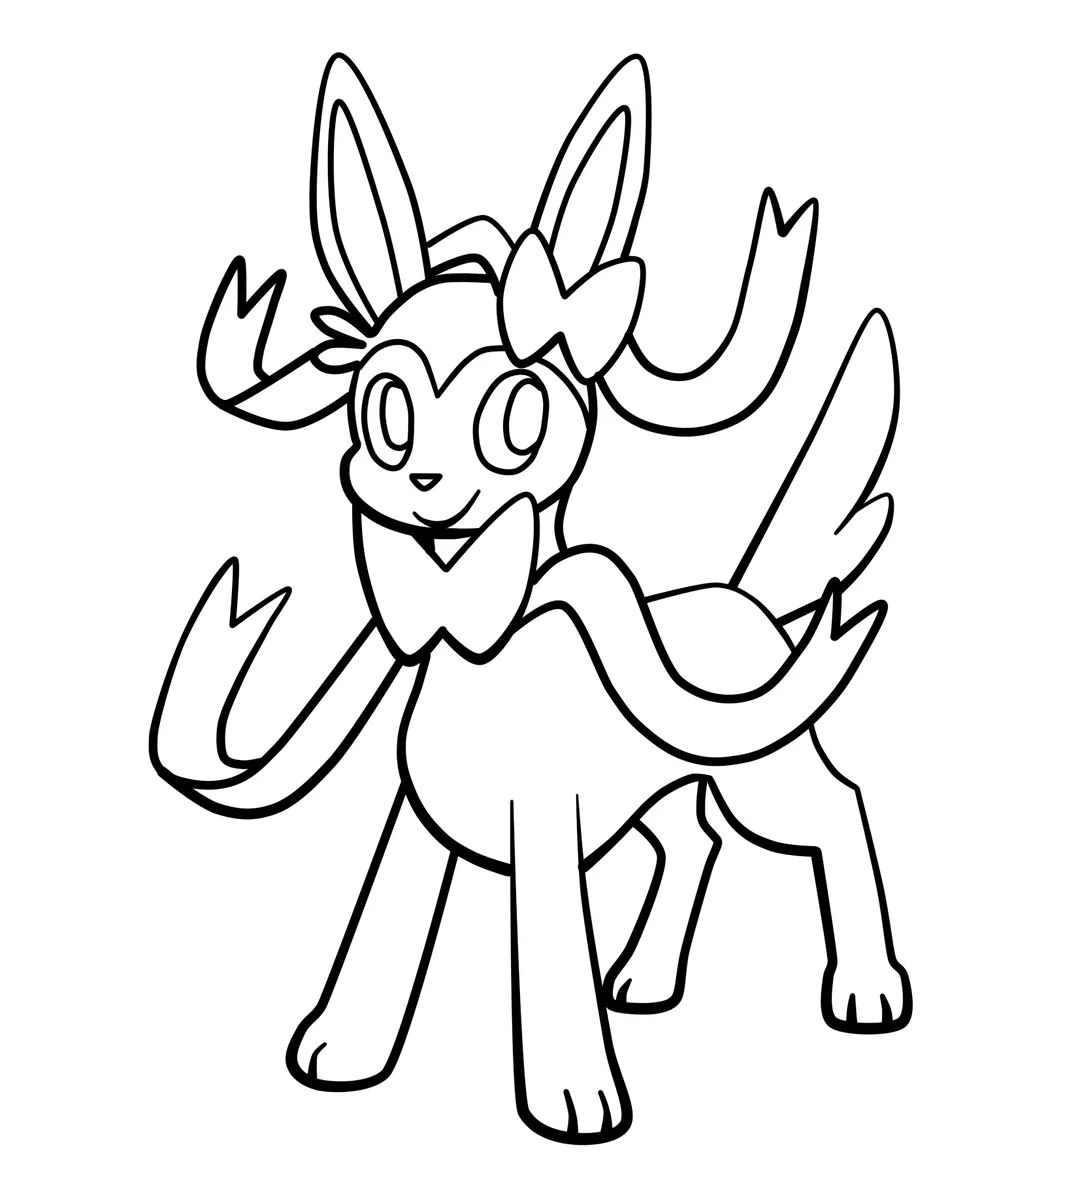 Oc i made sylveon in cartoon style it is an old drawing because i used to sketch in pencil first rpokemon